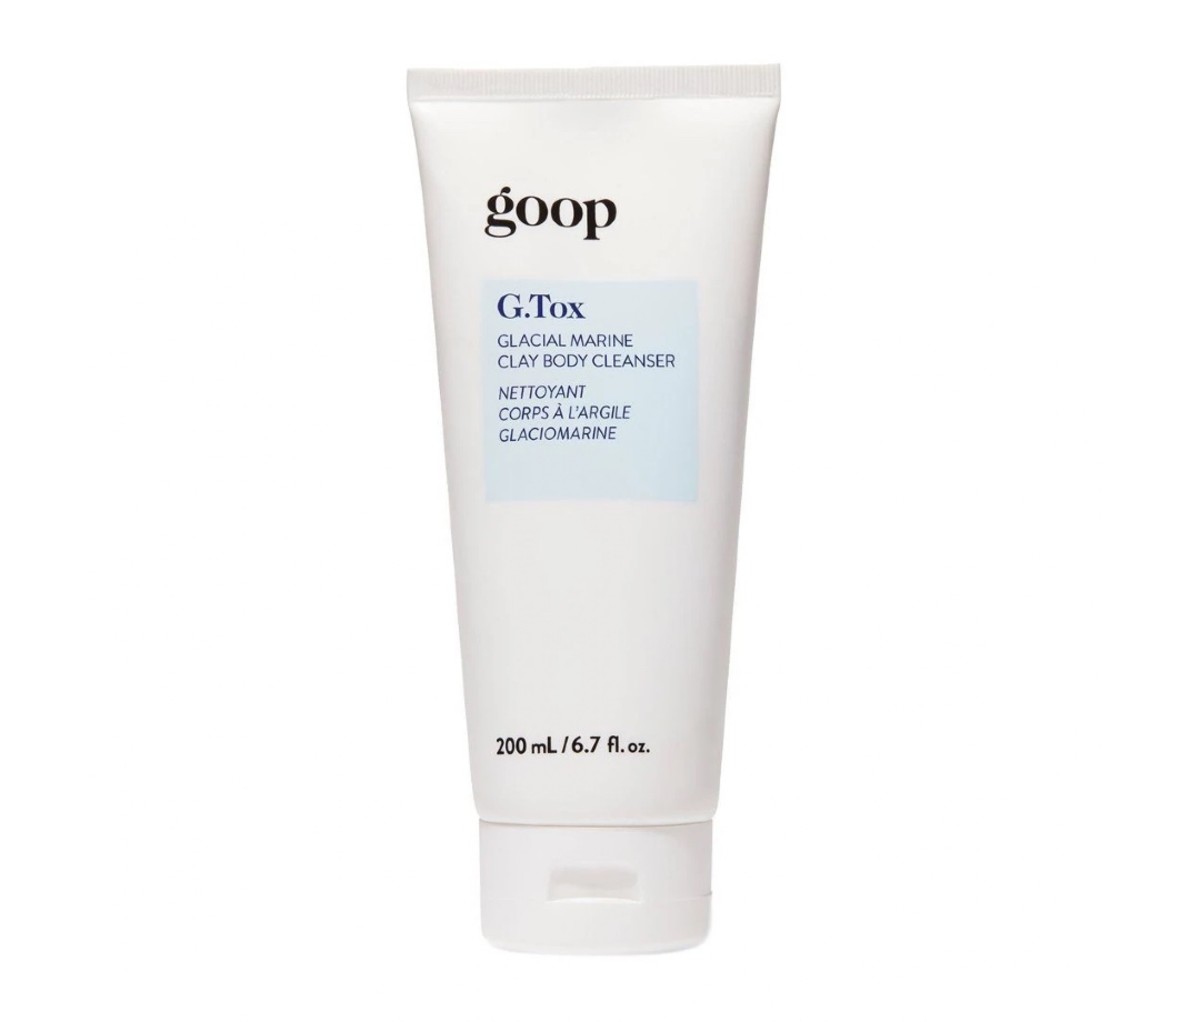 Goop G. Tox’s Glacial Marine Clay Body Cleanser